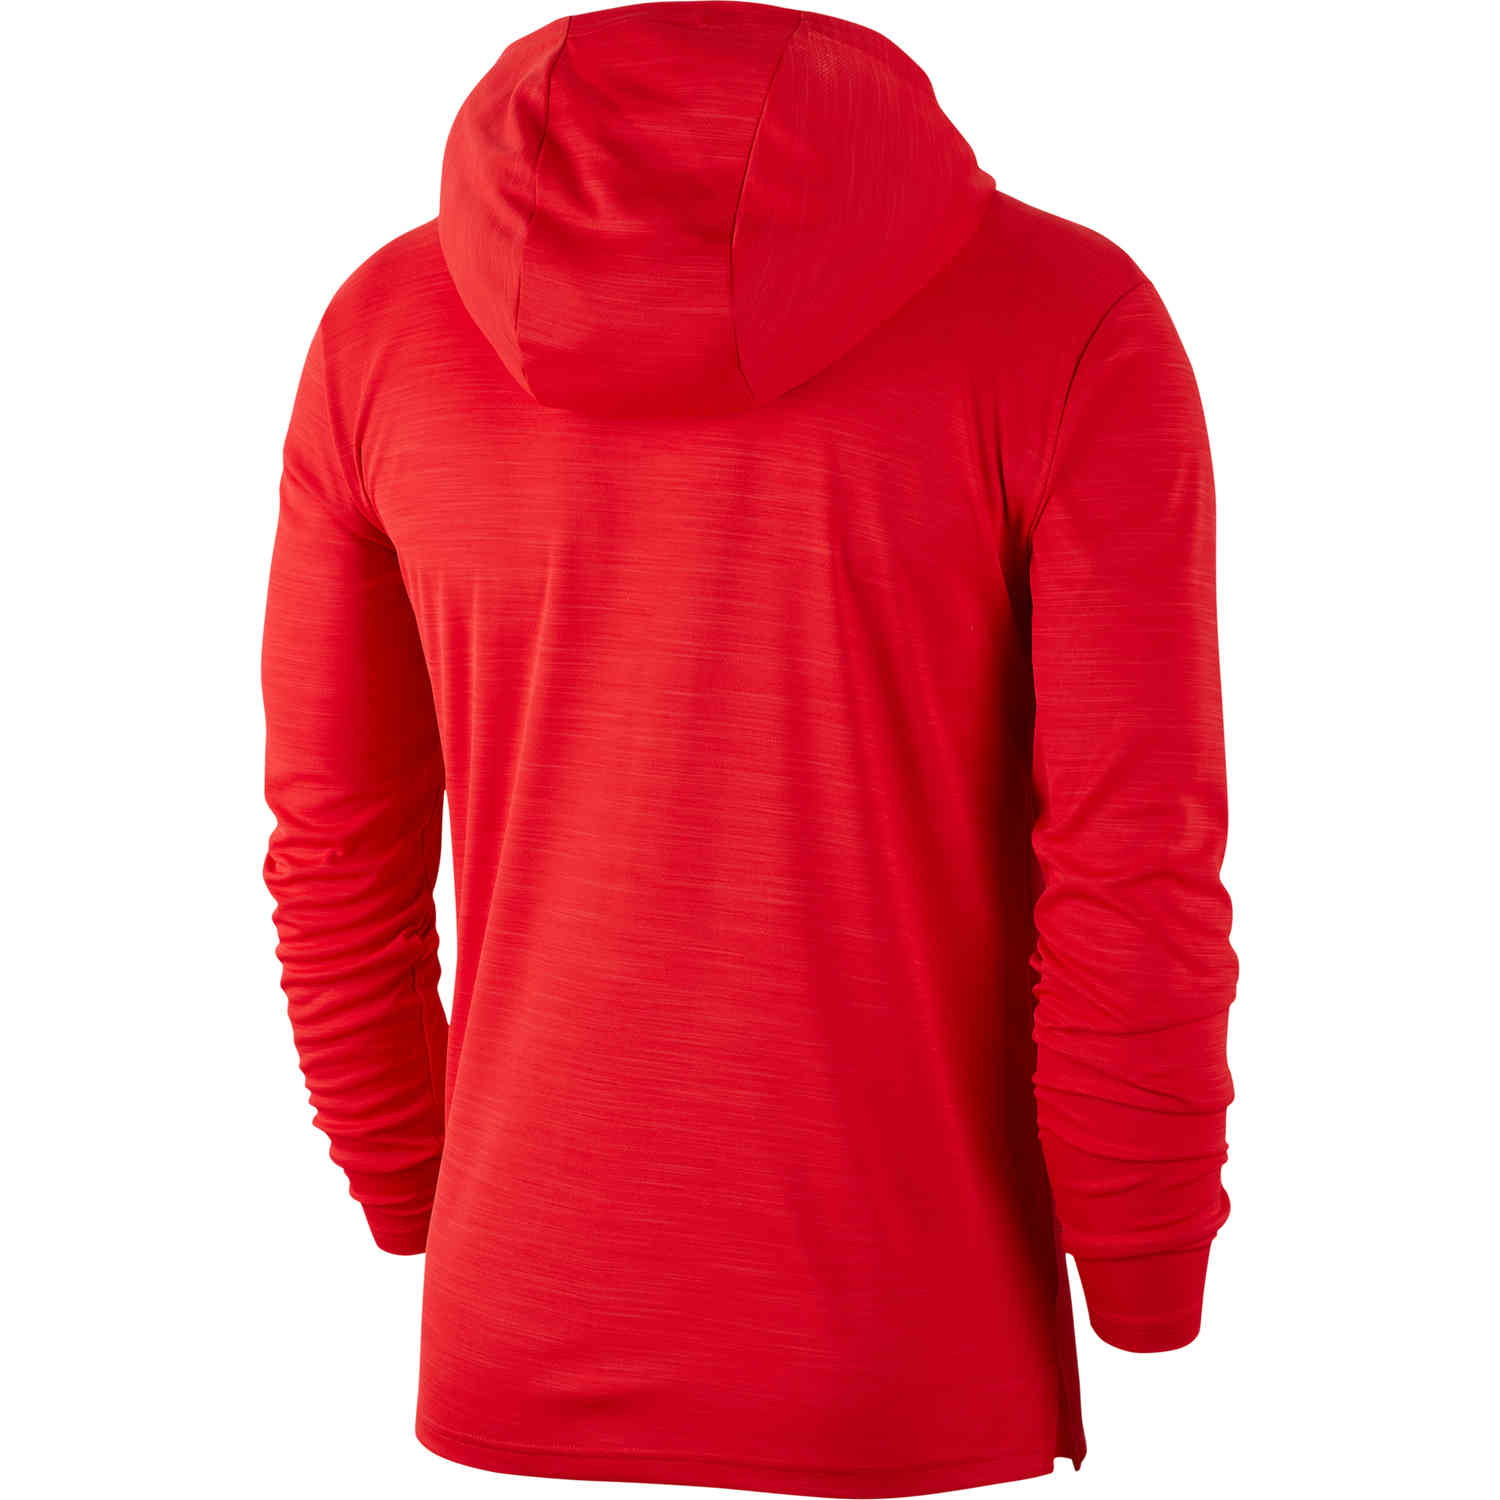 Nike Superset L/S Hooded Training Top - University Red/Black - Soccer ...